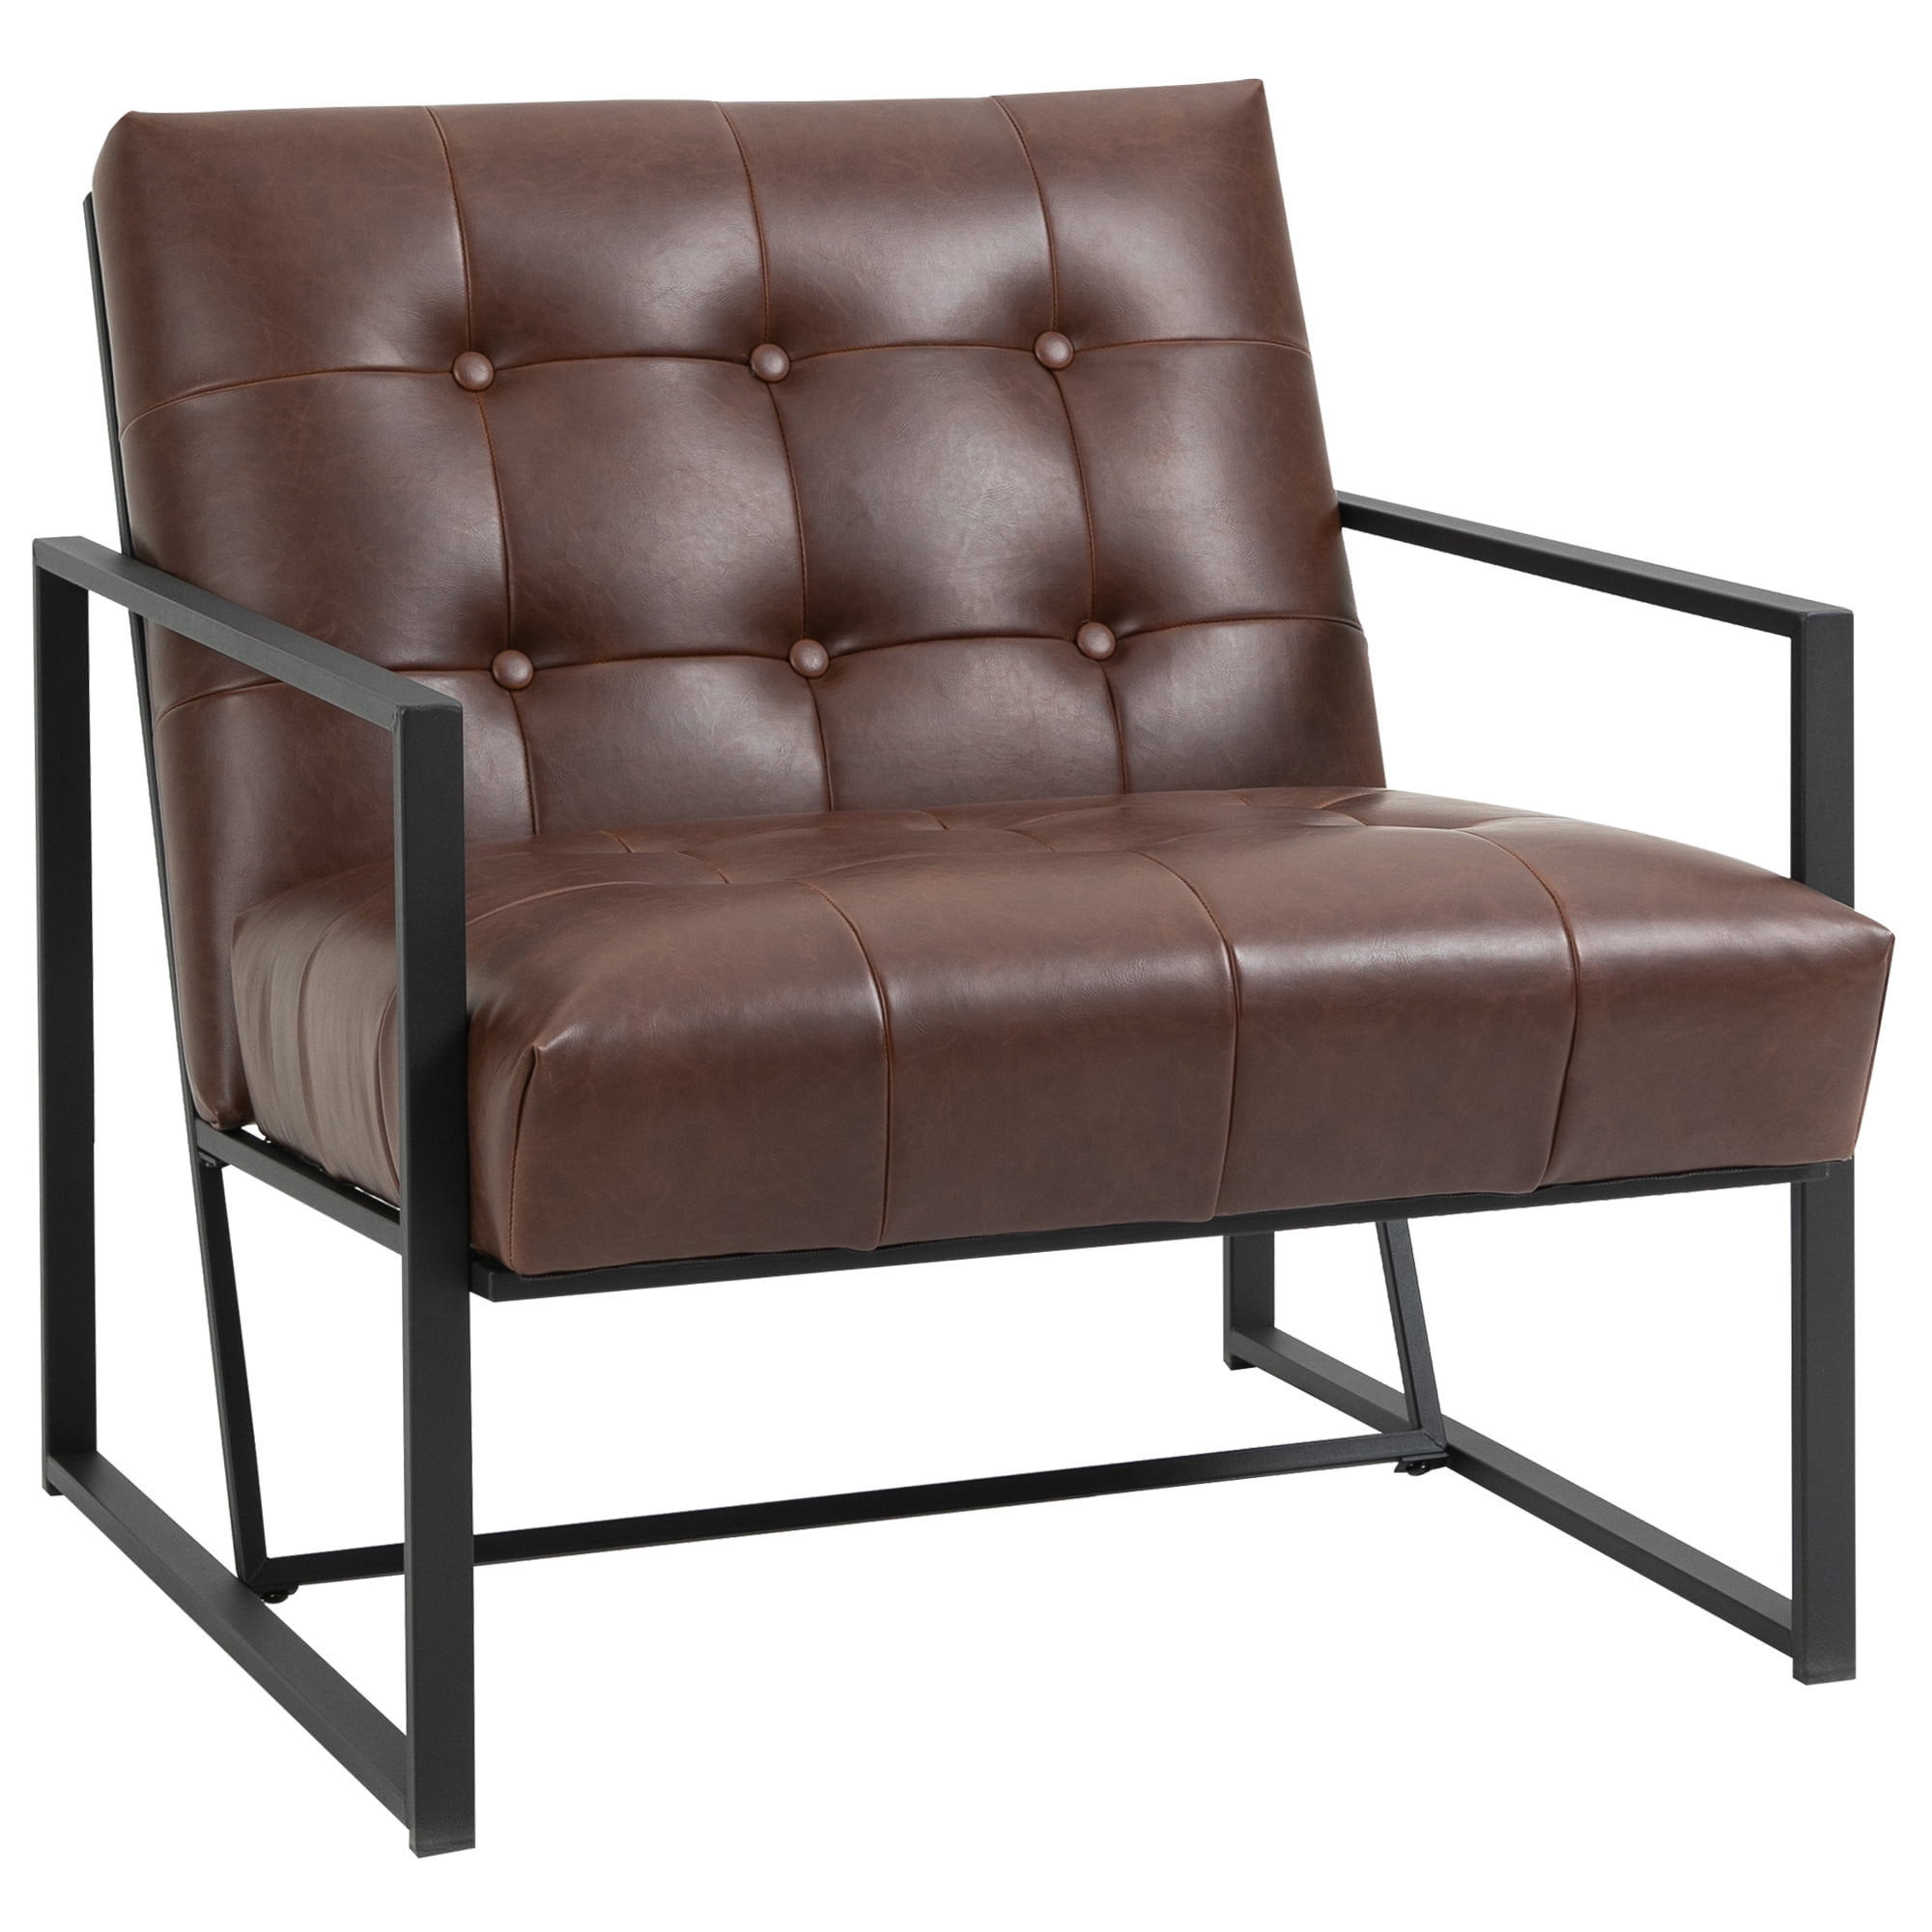 Modern Metal Frame Accent Chair : Studio Designs Home Camber Mid